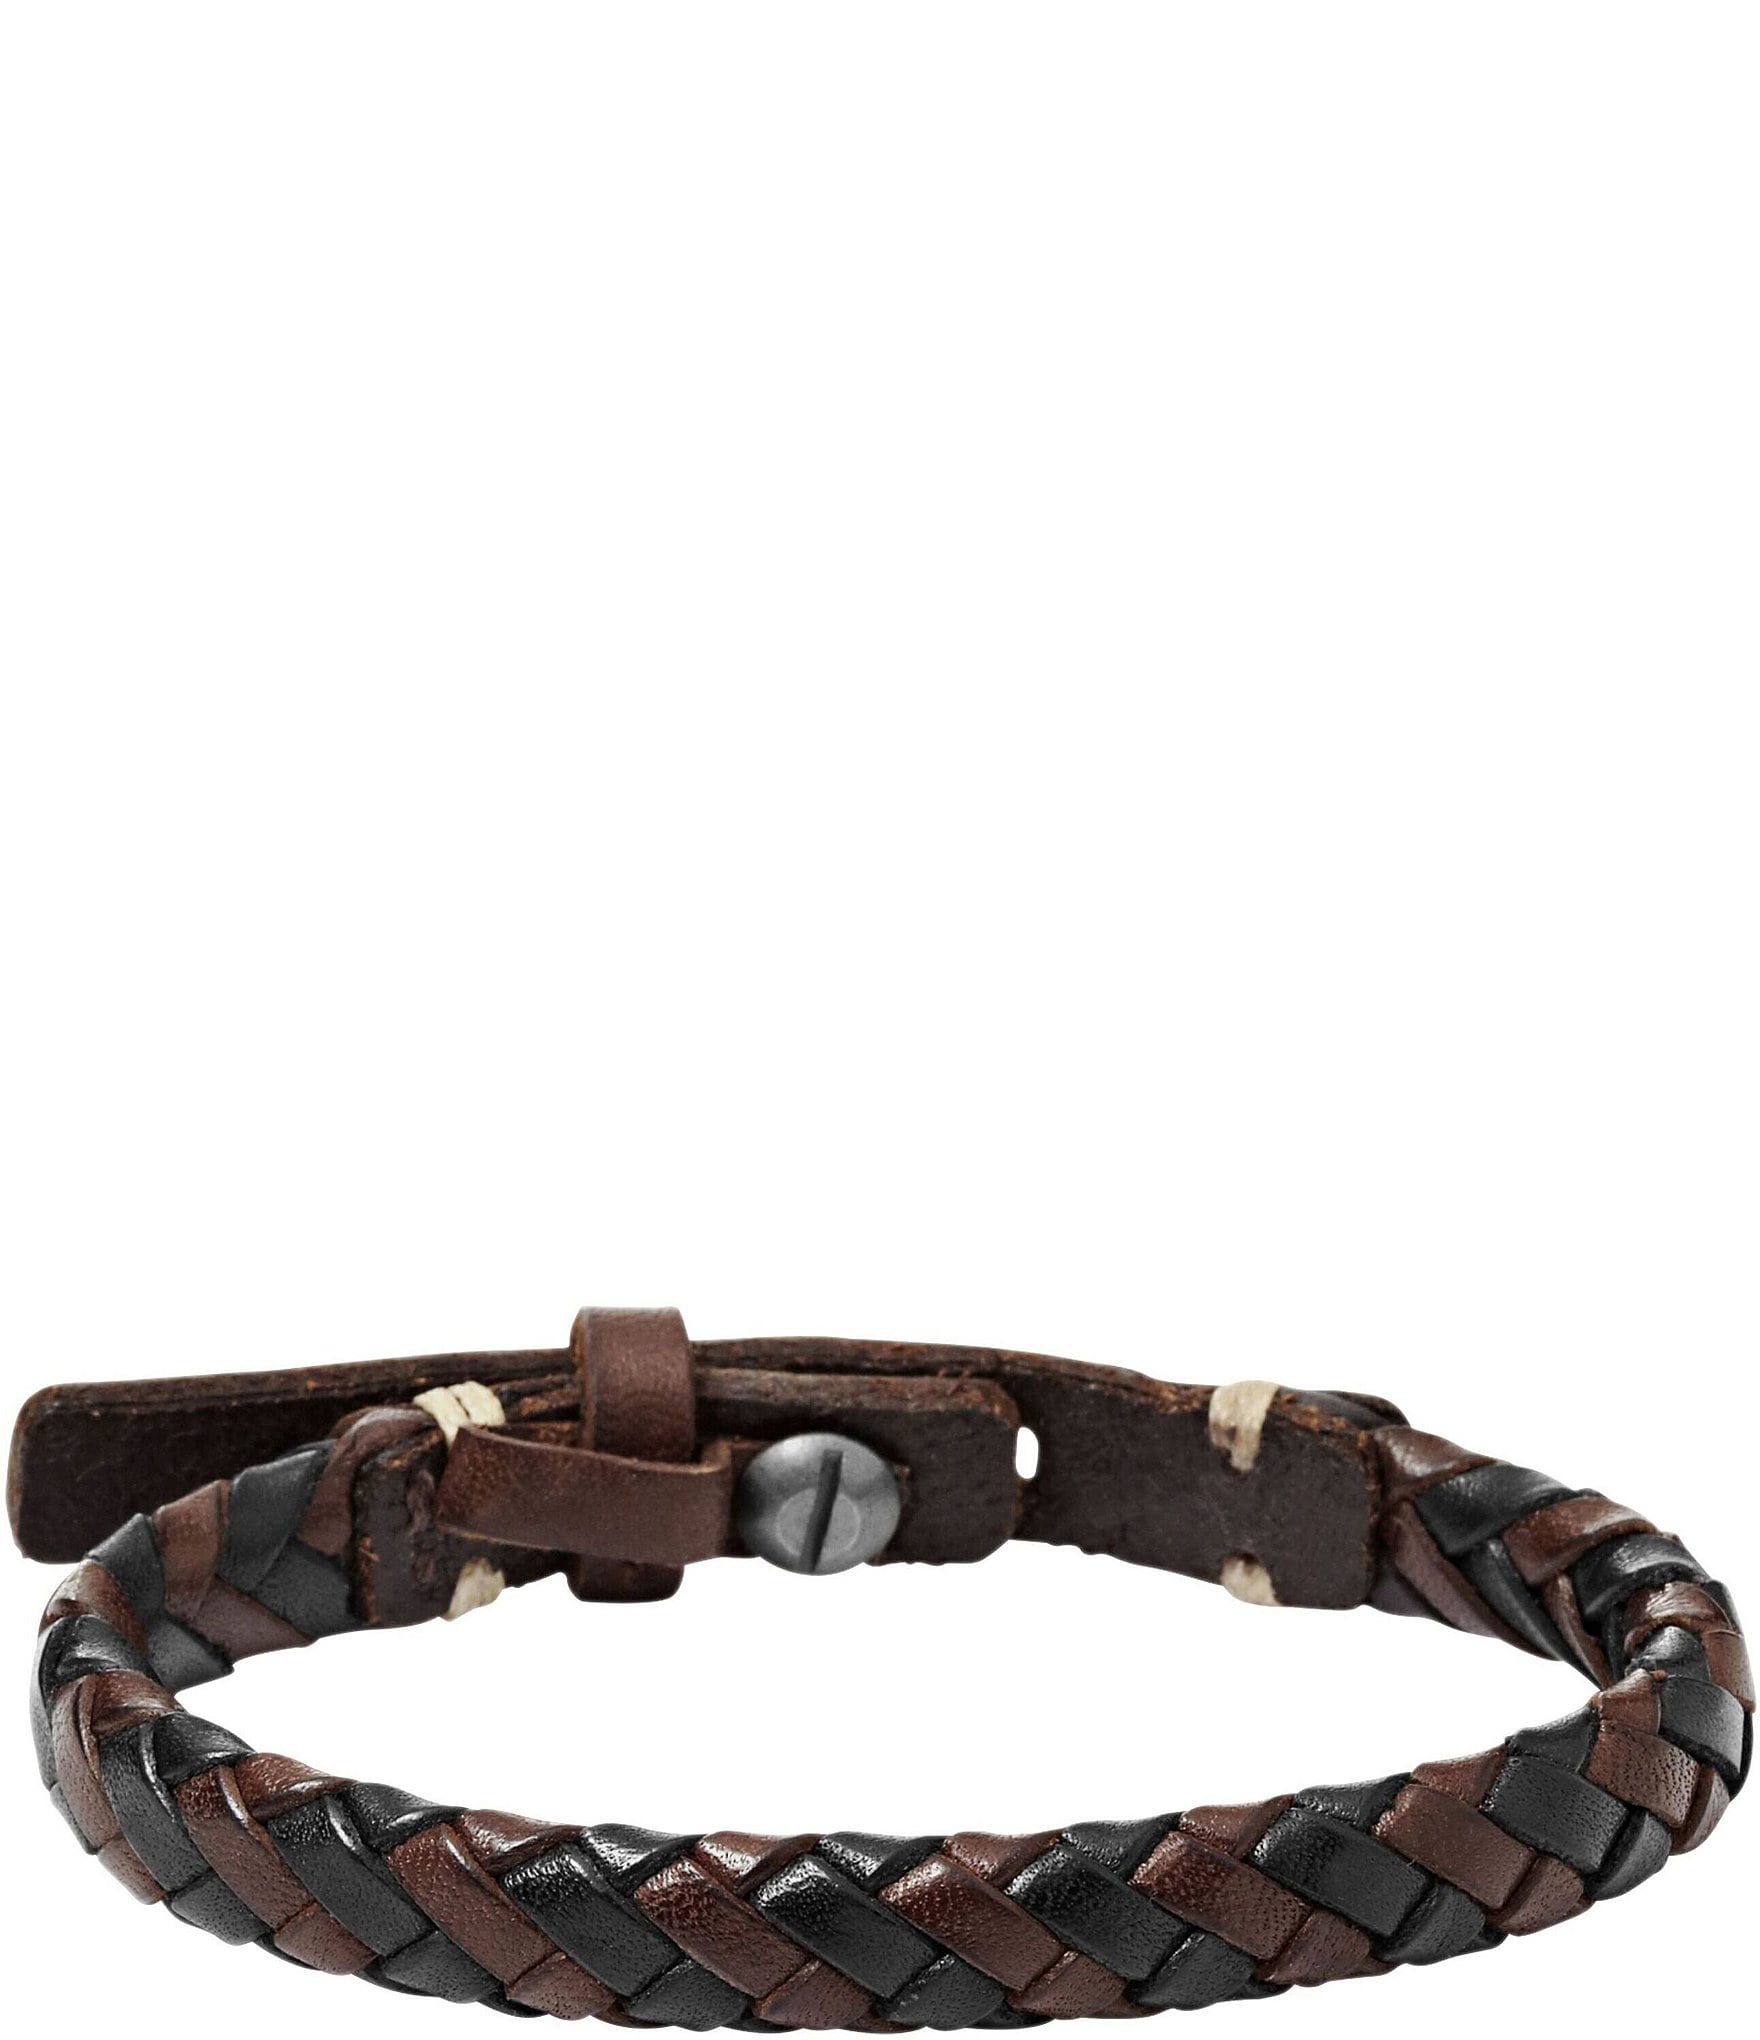 James Avery Artisan Jewelry - Soft leather bracelets wrap around the wrist,  adding texture and warmth to your everyday autumn style. Shop the look and  more at https://bit.ly/2FA59xC. | Facebook